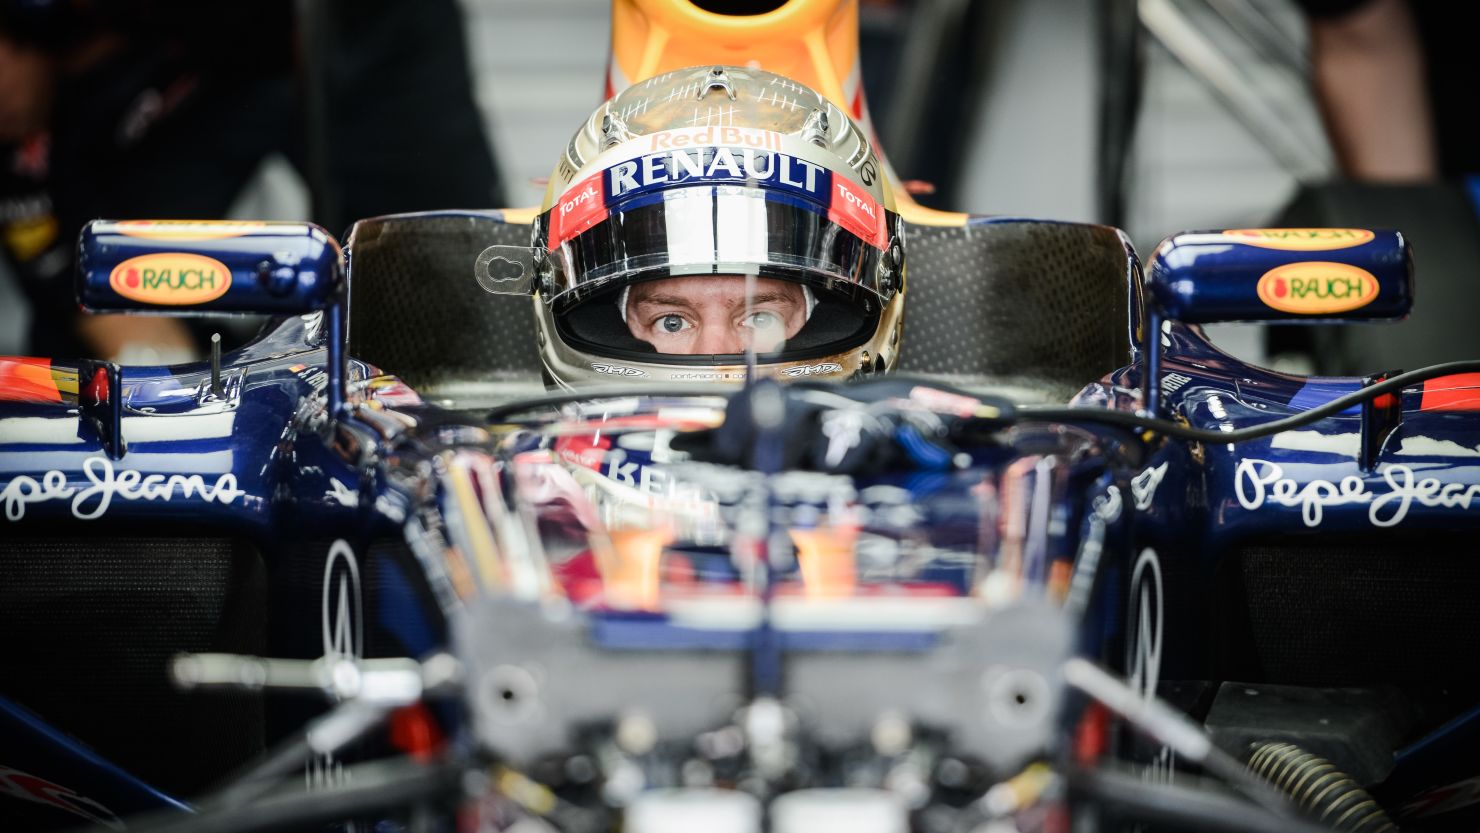 Red Bull's Sebastian Vettel has won the last two rounds of the world championship and is only four points behind leader Fernando Alonso.